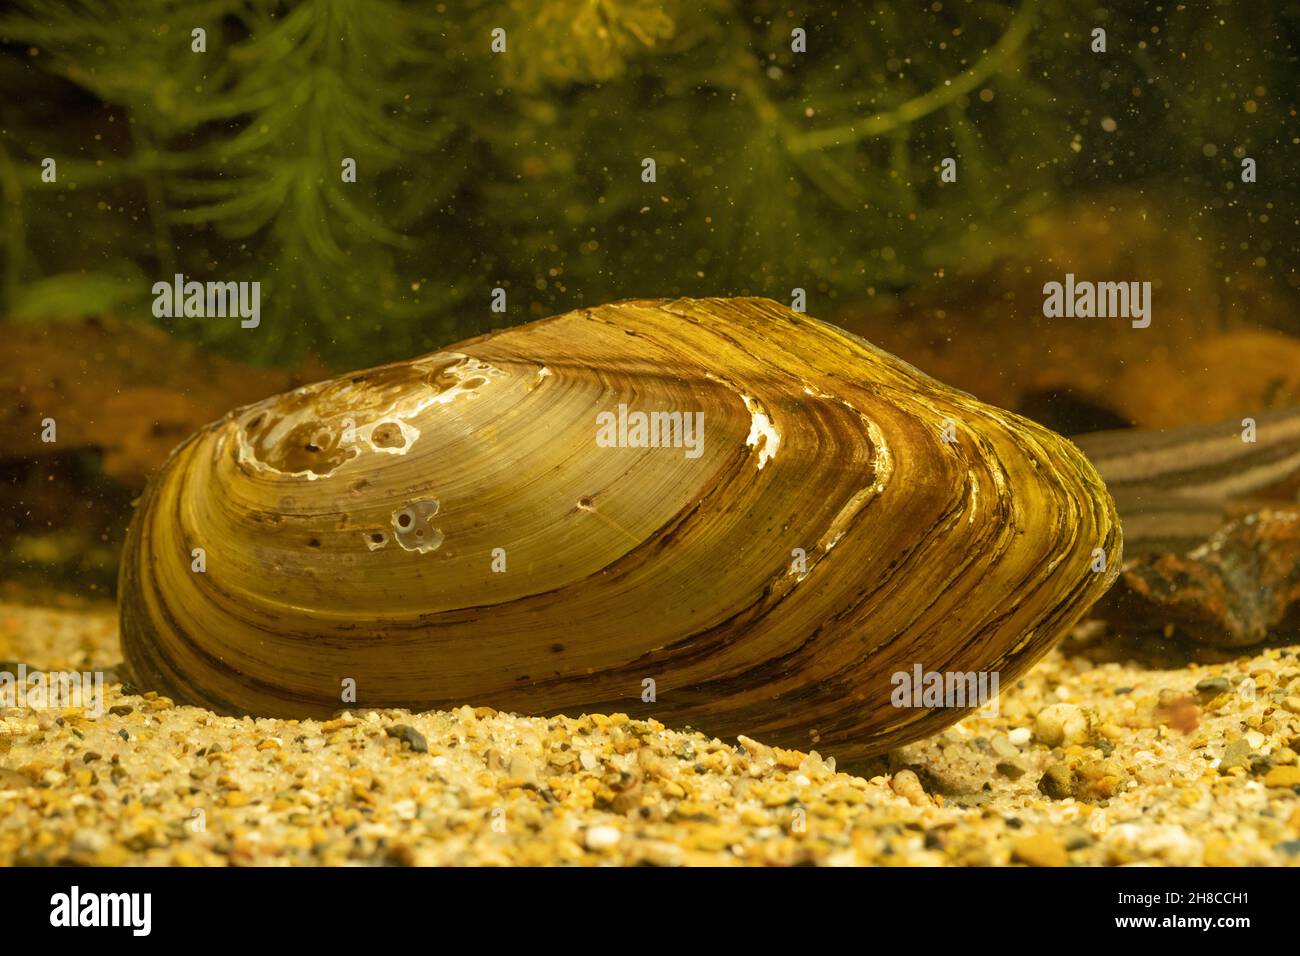 Common pond mussel, duck mussel (Anodonta anatina), on the bottom Stock Photo